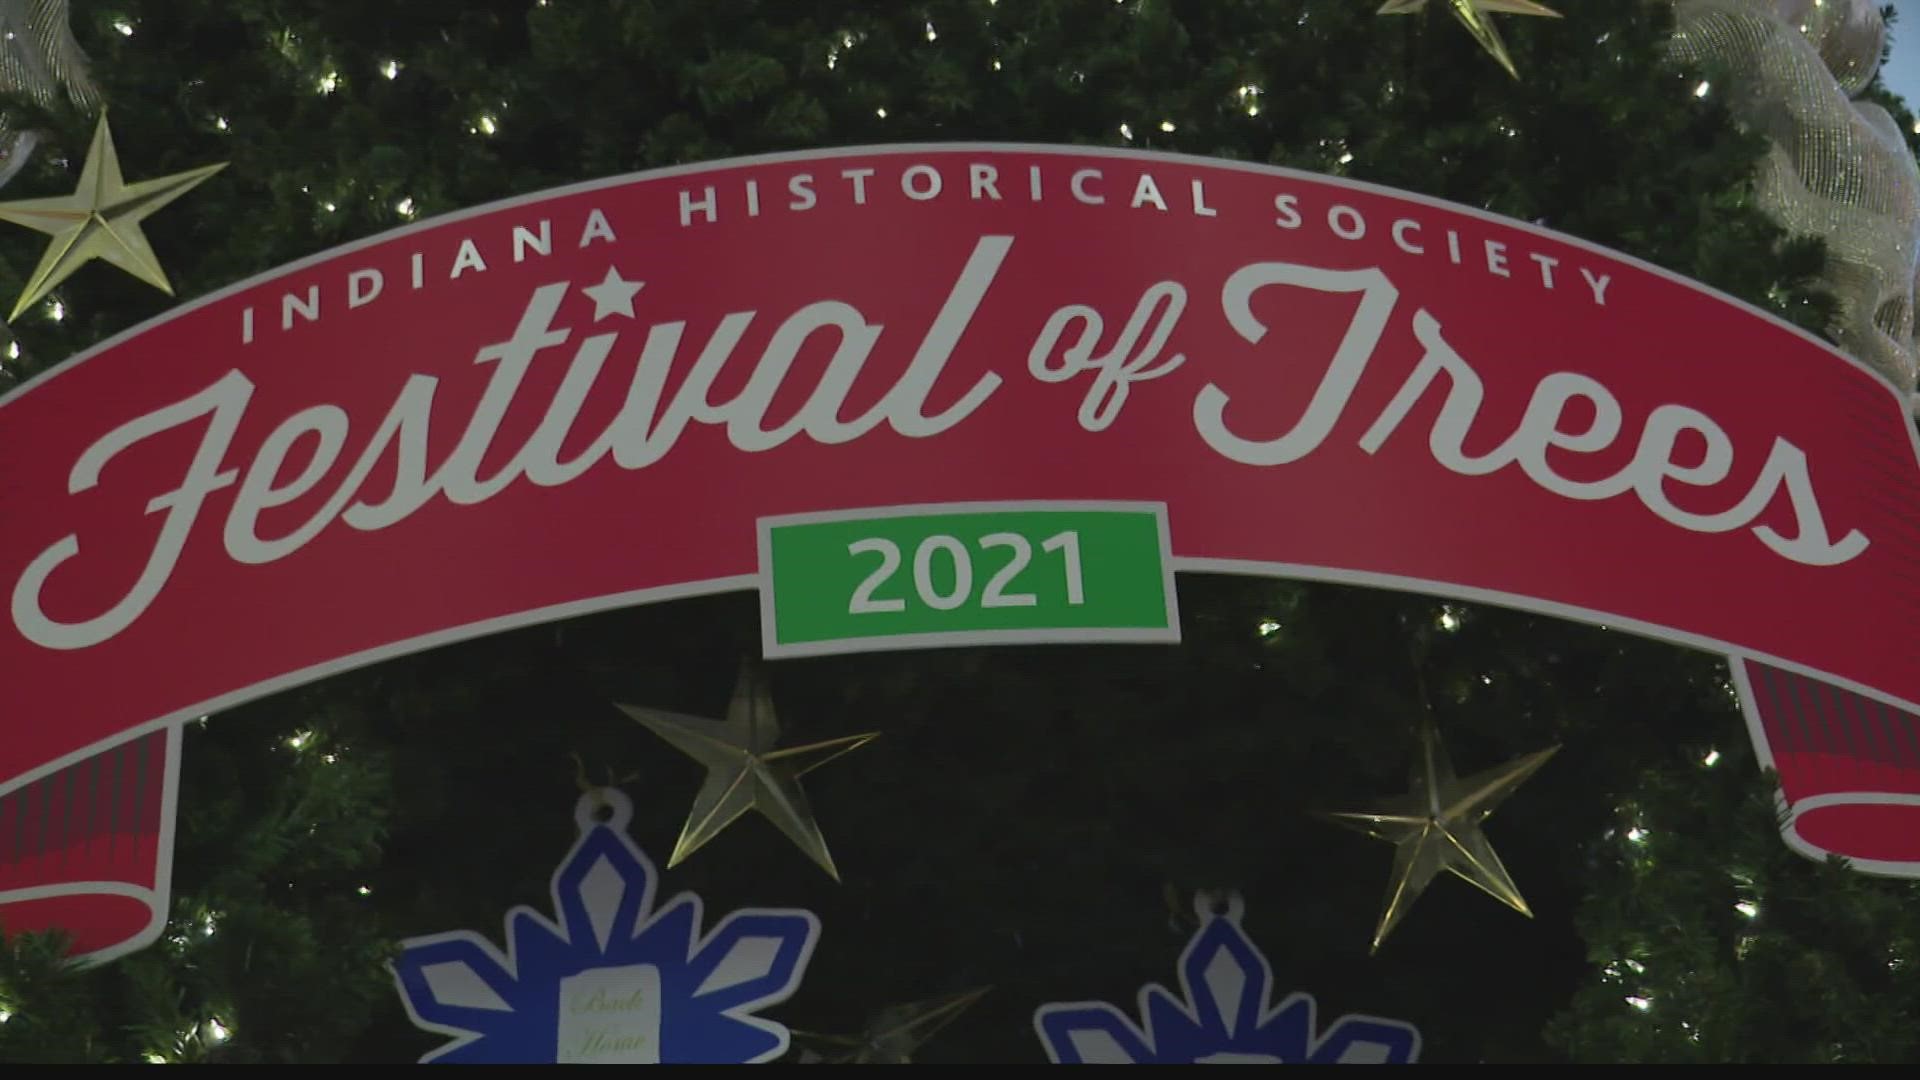 The festival features 75 trees at the Indiana Historical Society and all are uniquely designed by local businesses and nonprofits.